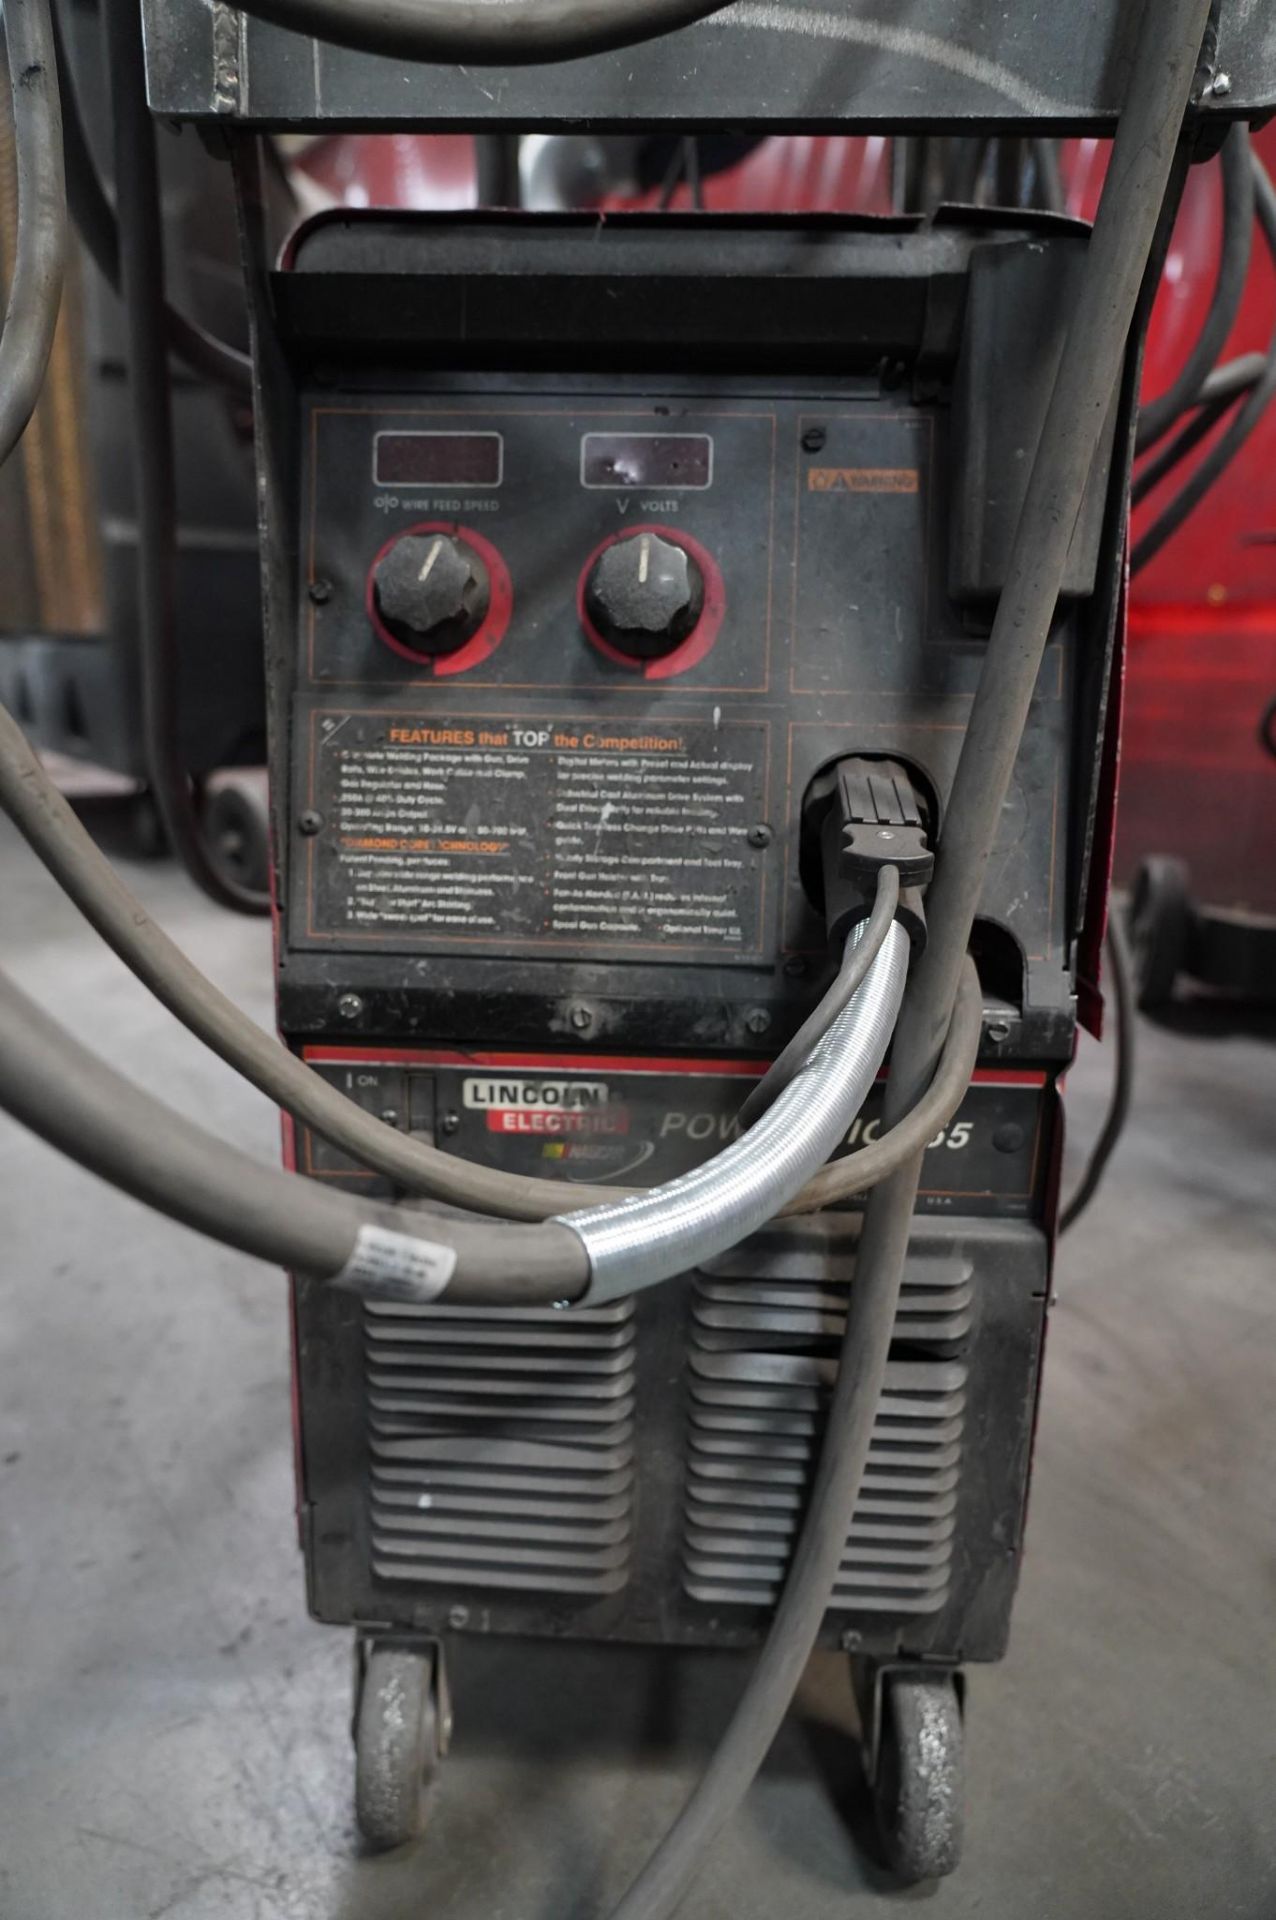 LINCOLN ELECTRIC 255 POWER MIG WELDER - Image 4 of 8